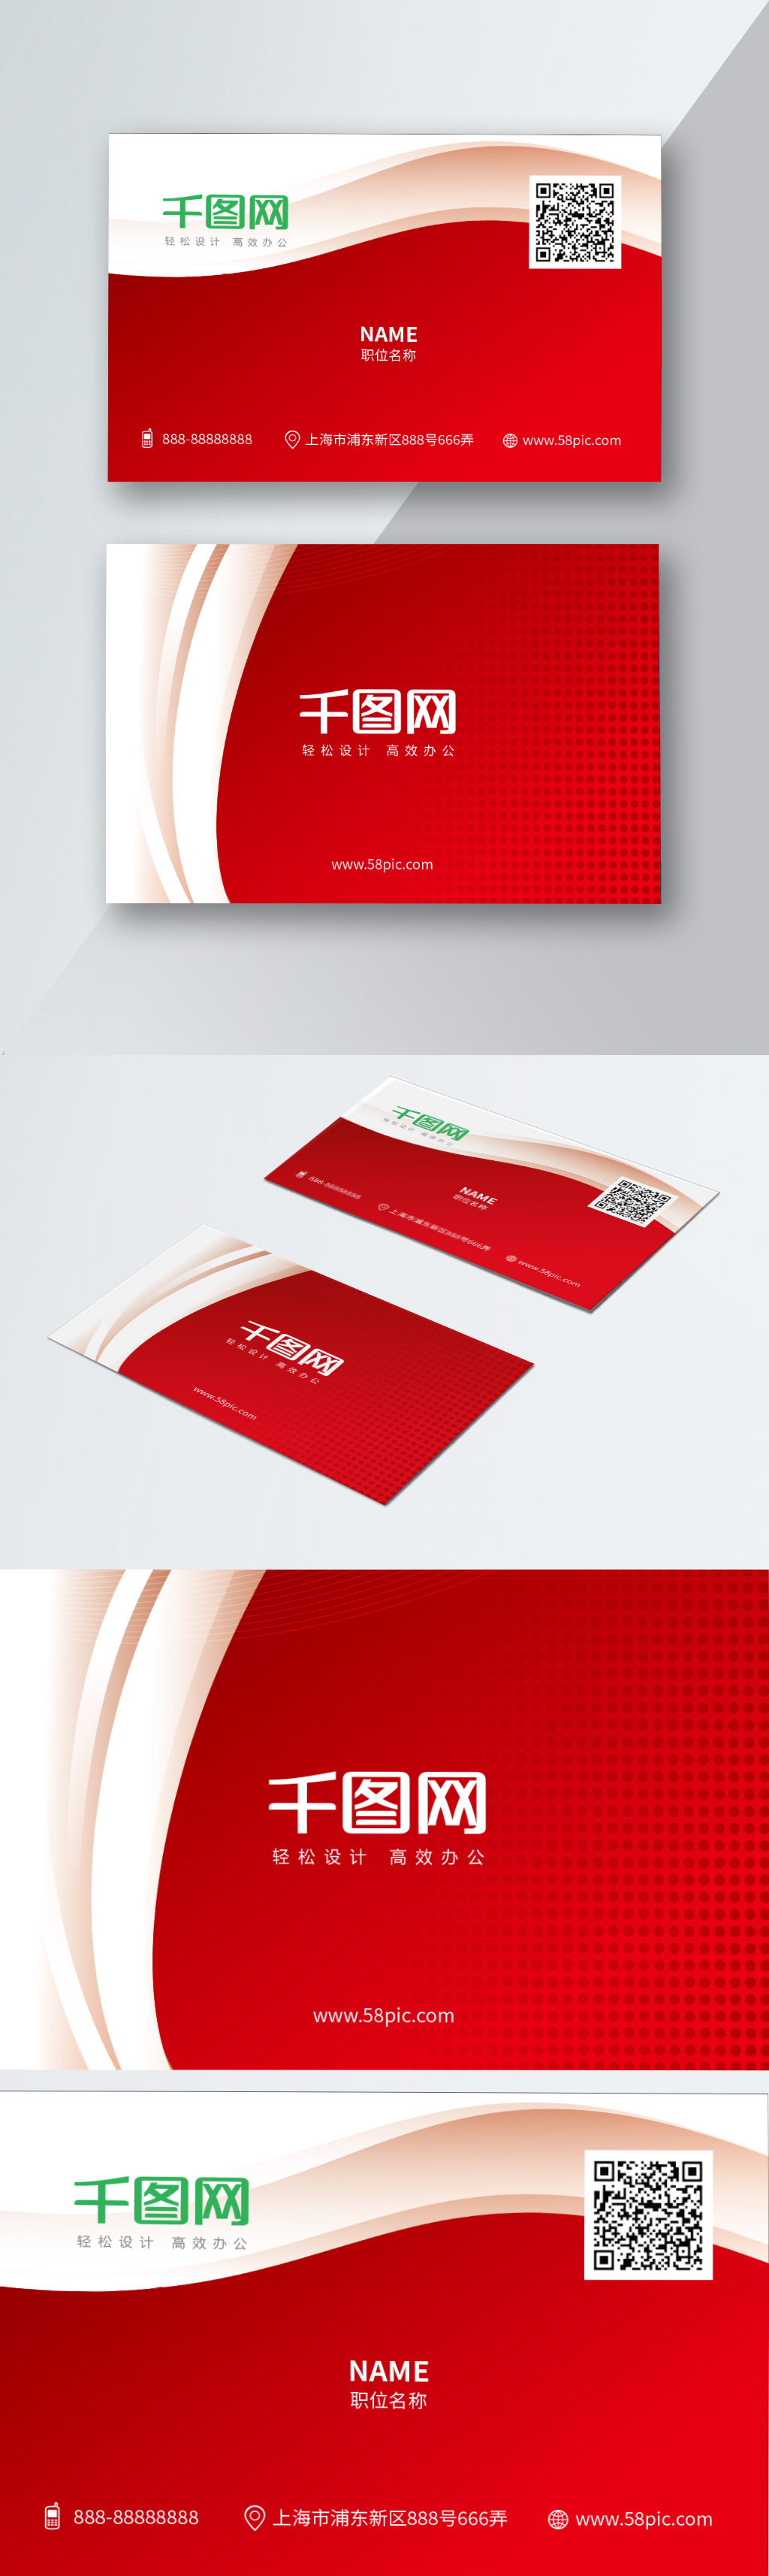 red-business-card-with-qr-code-template-image-picture-free-download